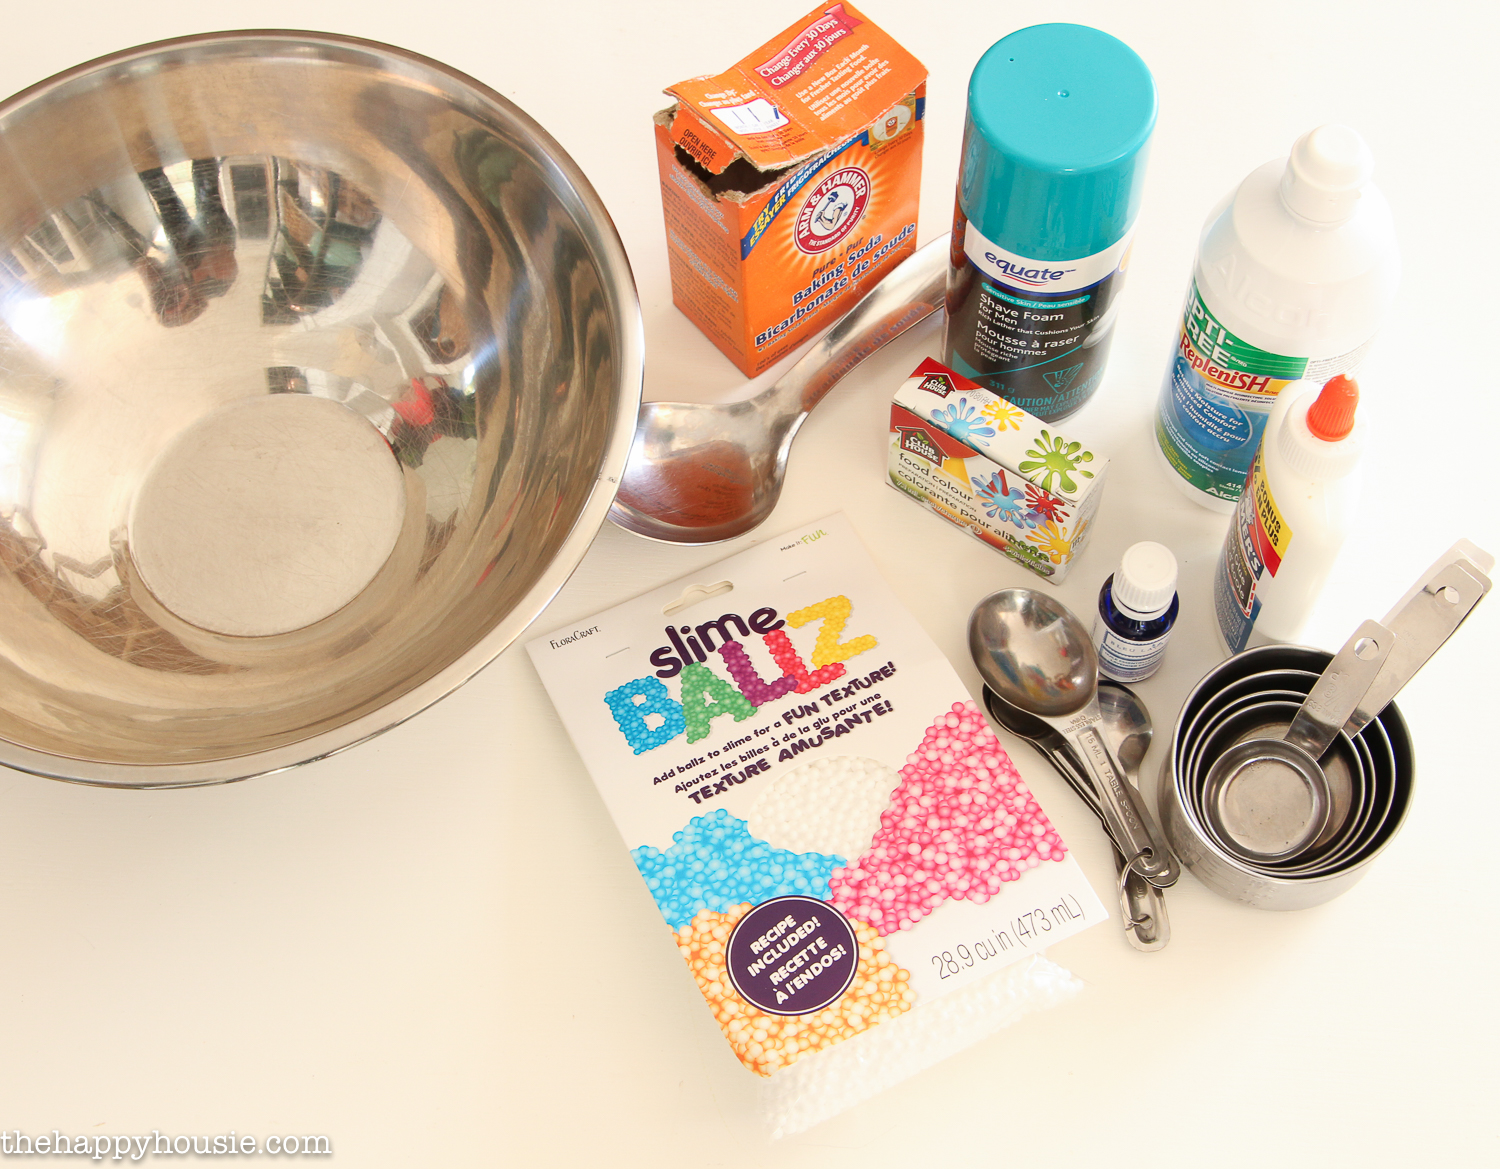 All the ingredients for the slime plus a large steel bowl.